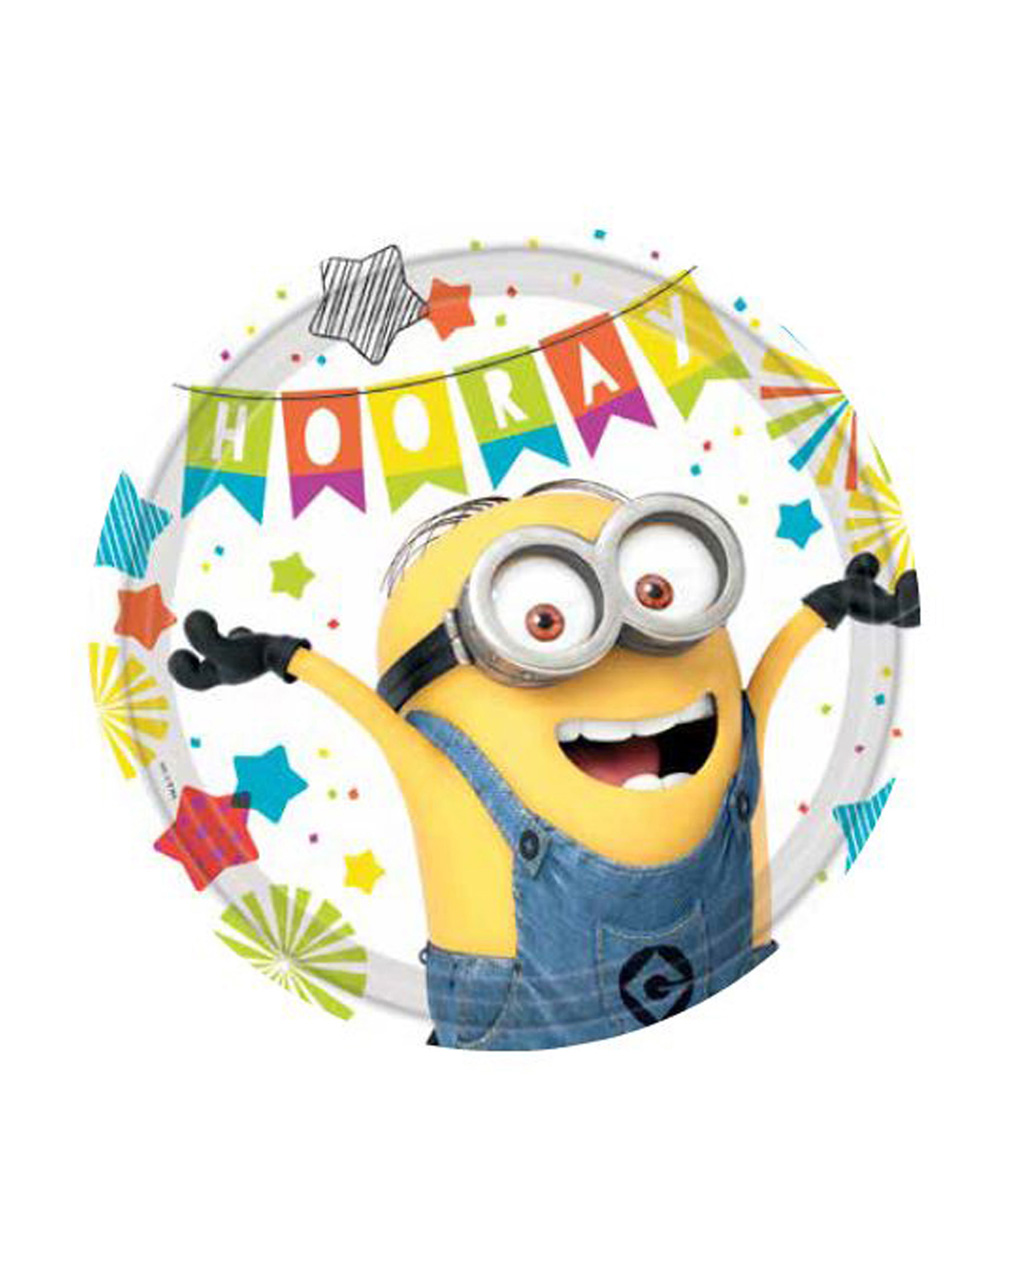 Minions Despicable Me Party Favor Buy 1 Get 1 50% Off Add 2 to Cart 